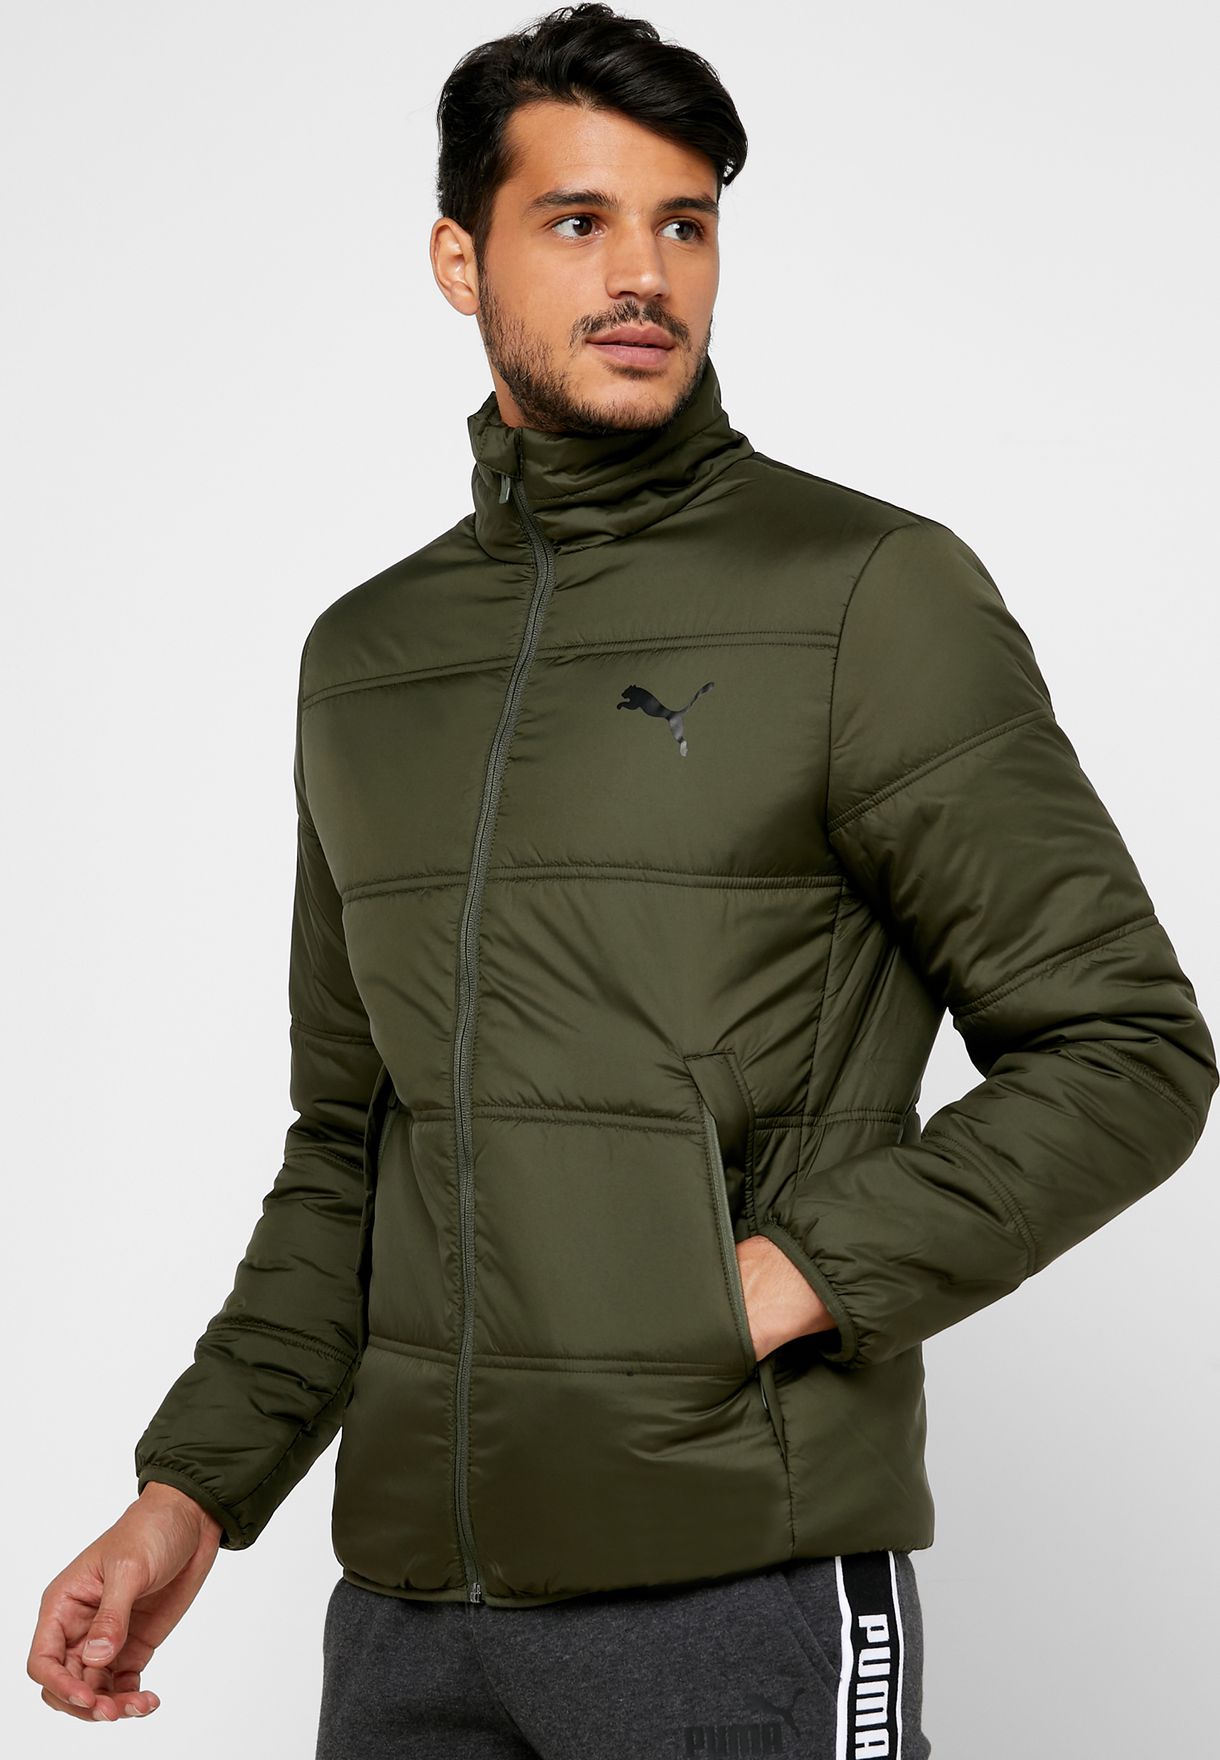 puma quilted jackets online